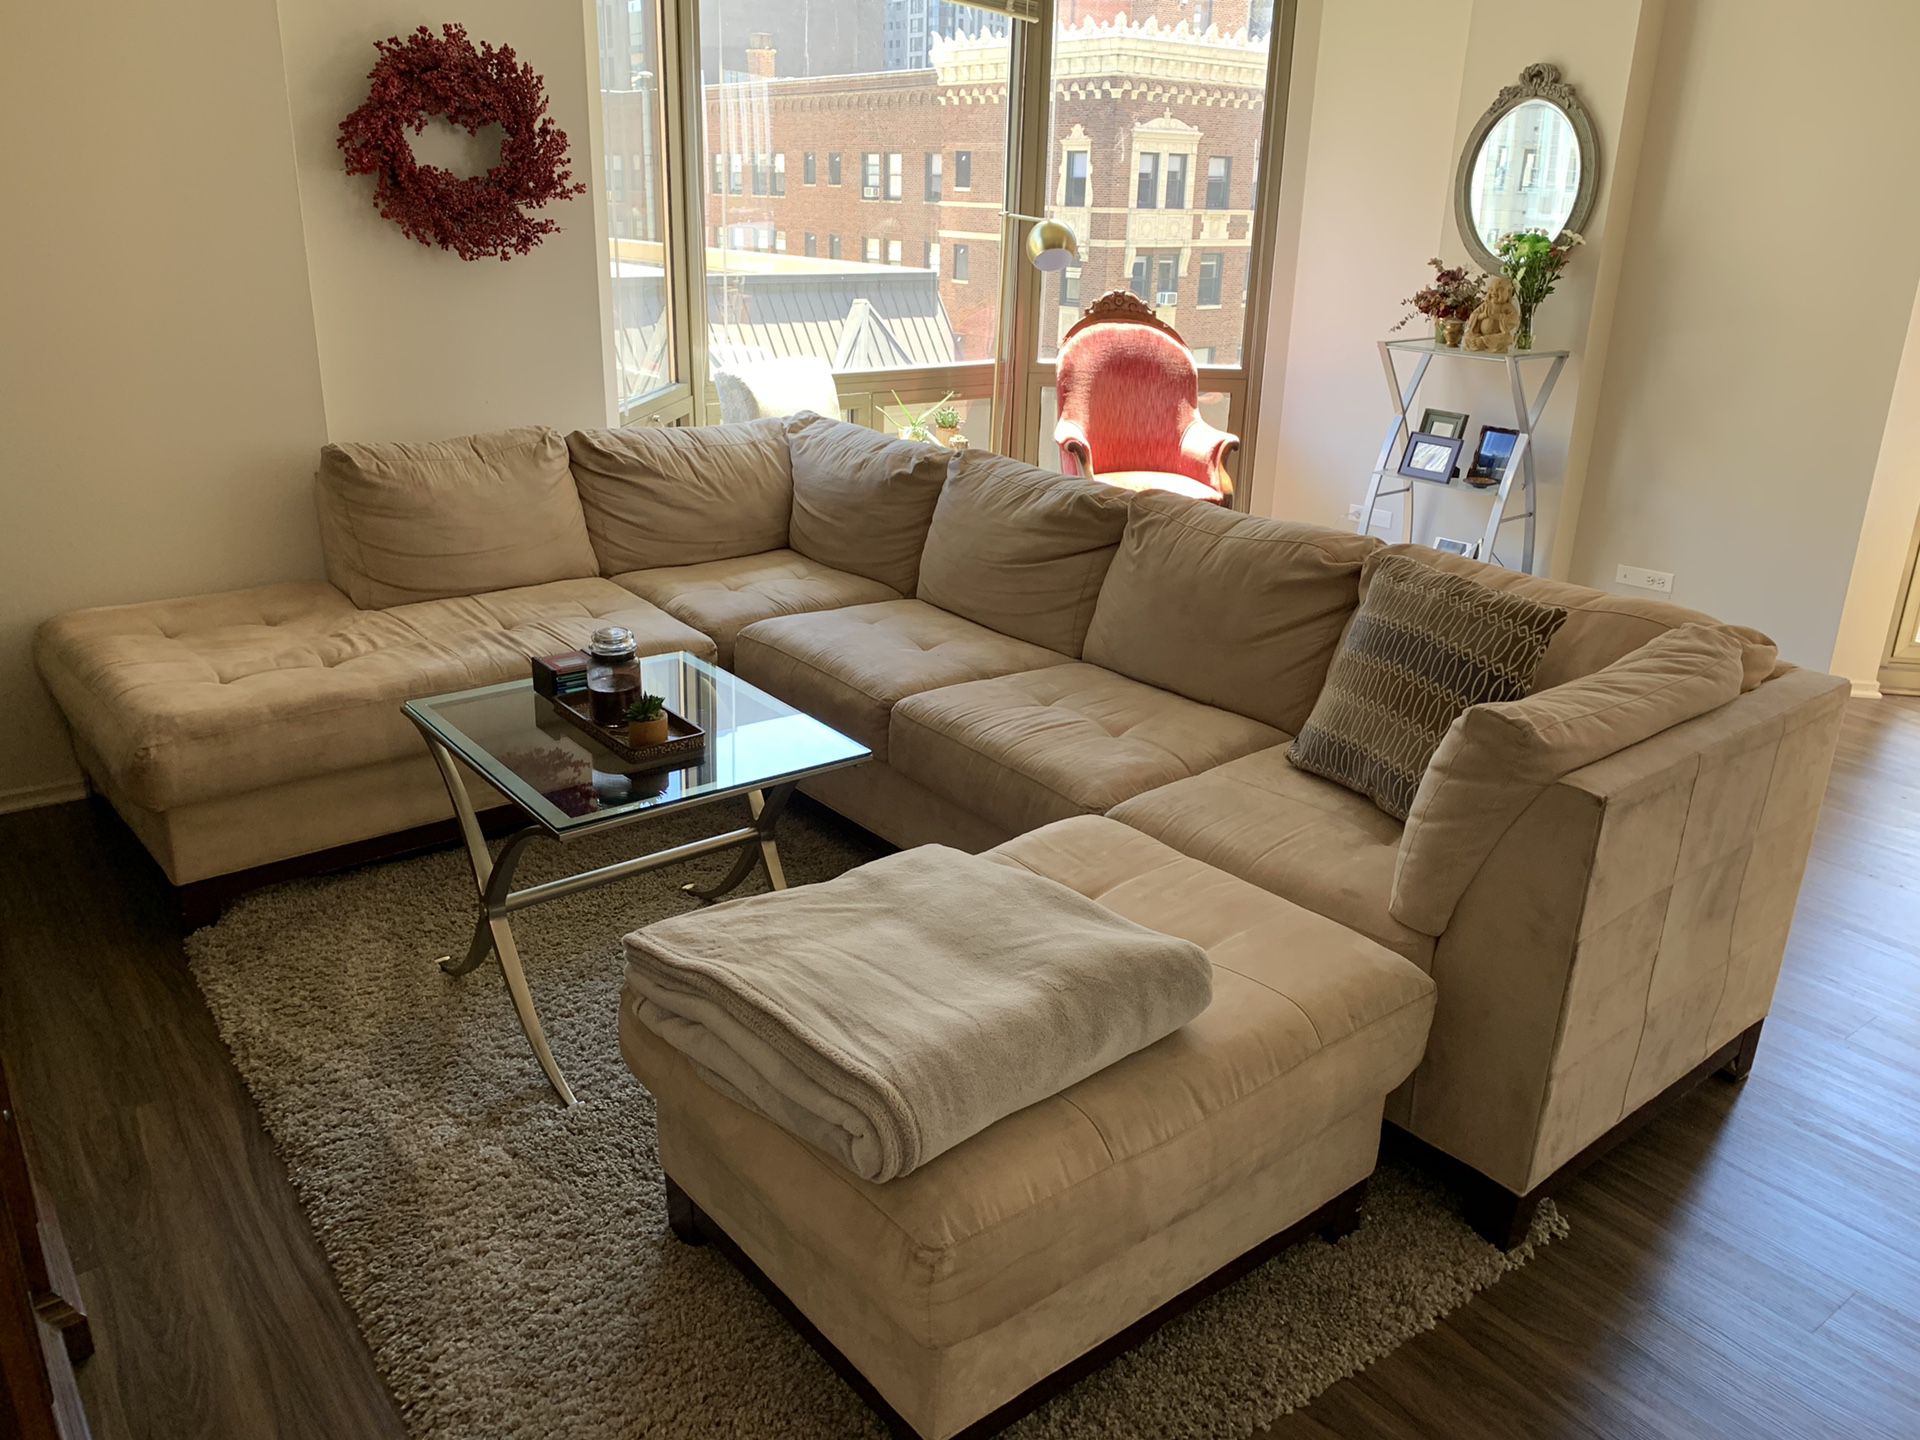 3 piece sectional